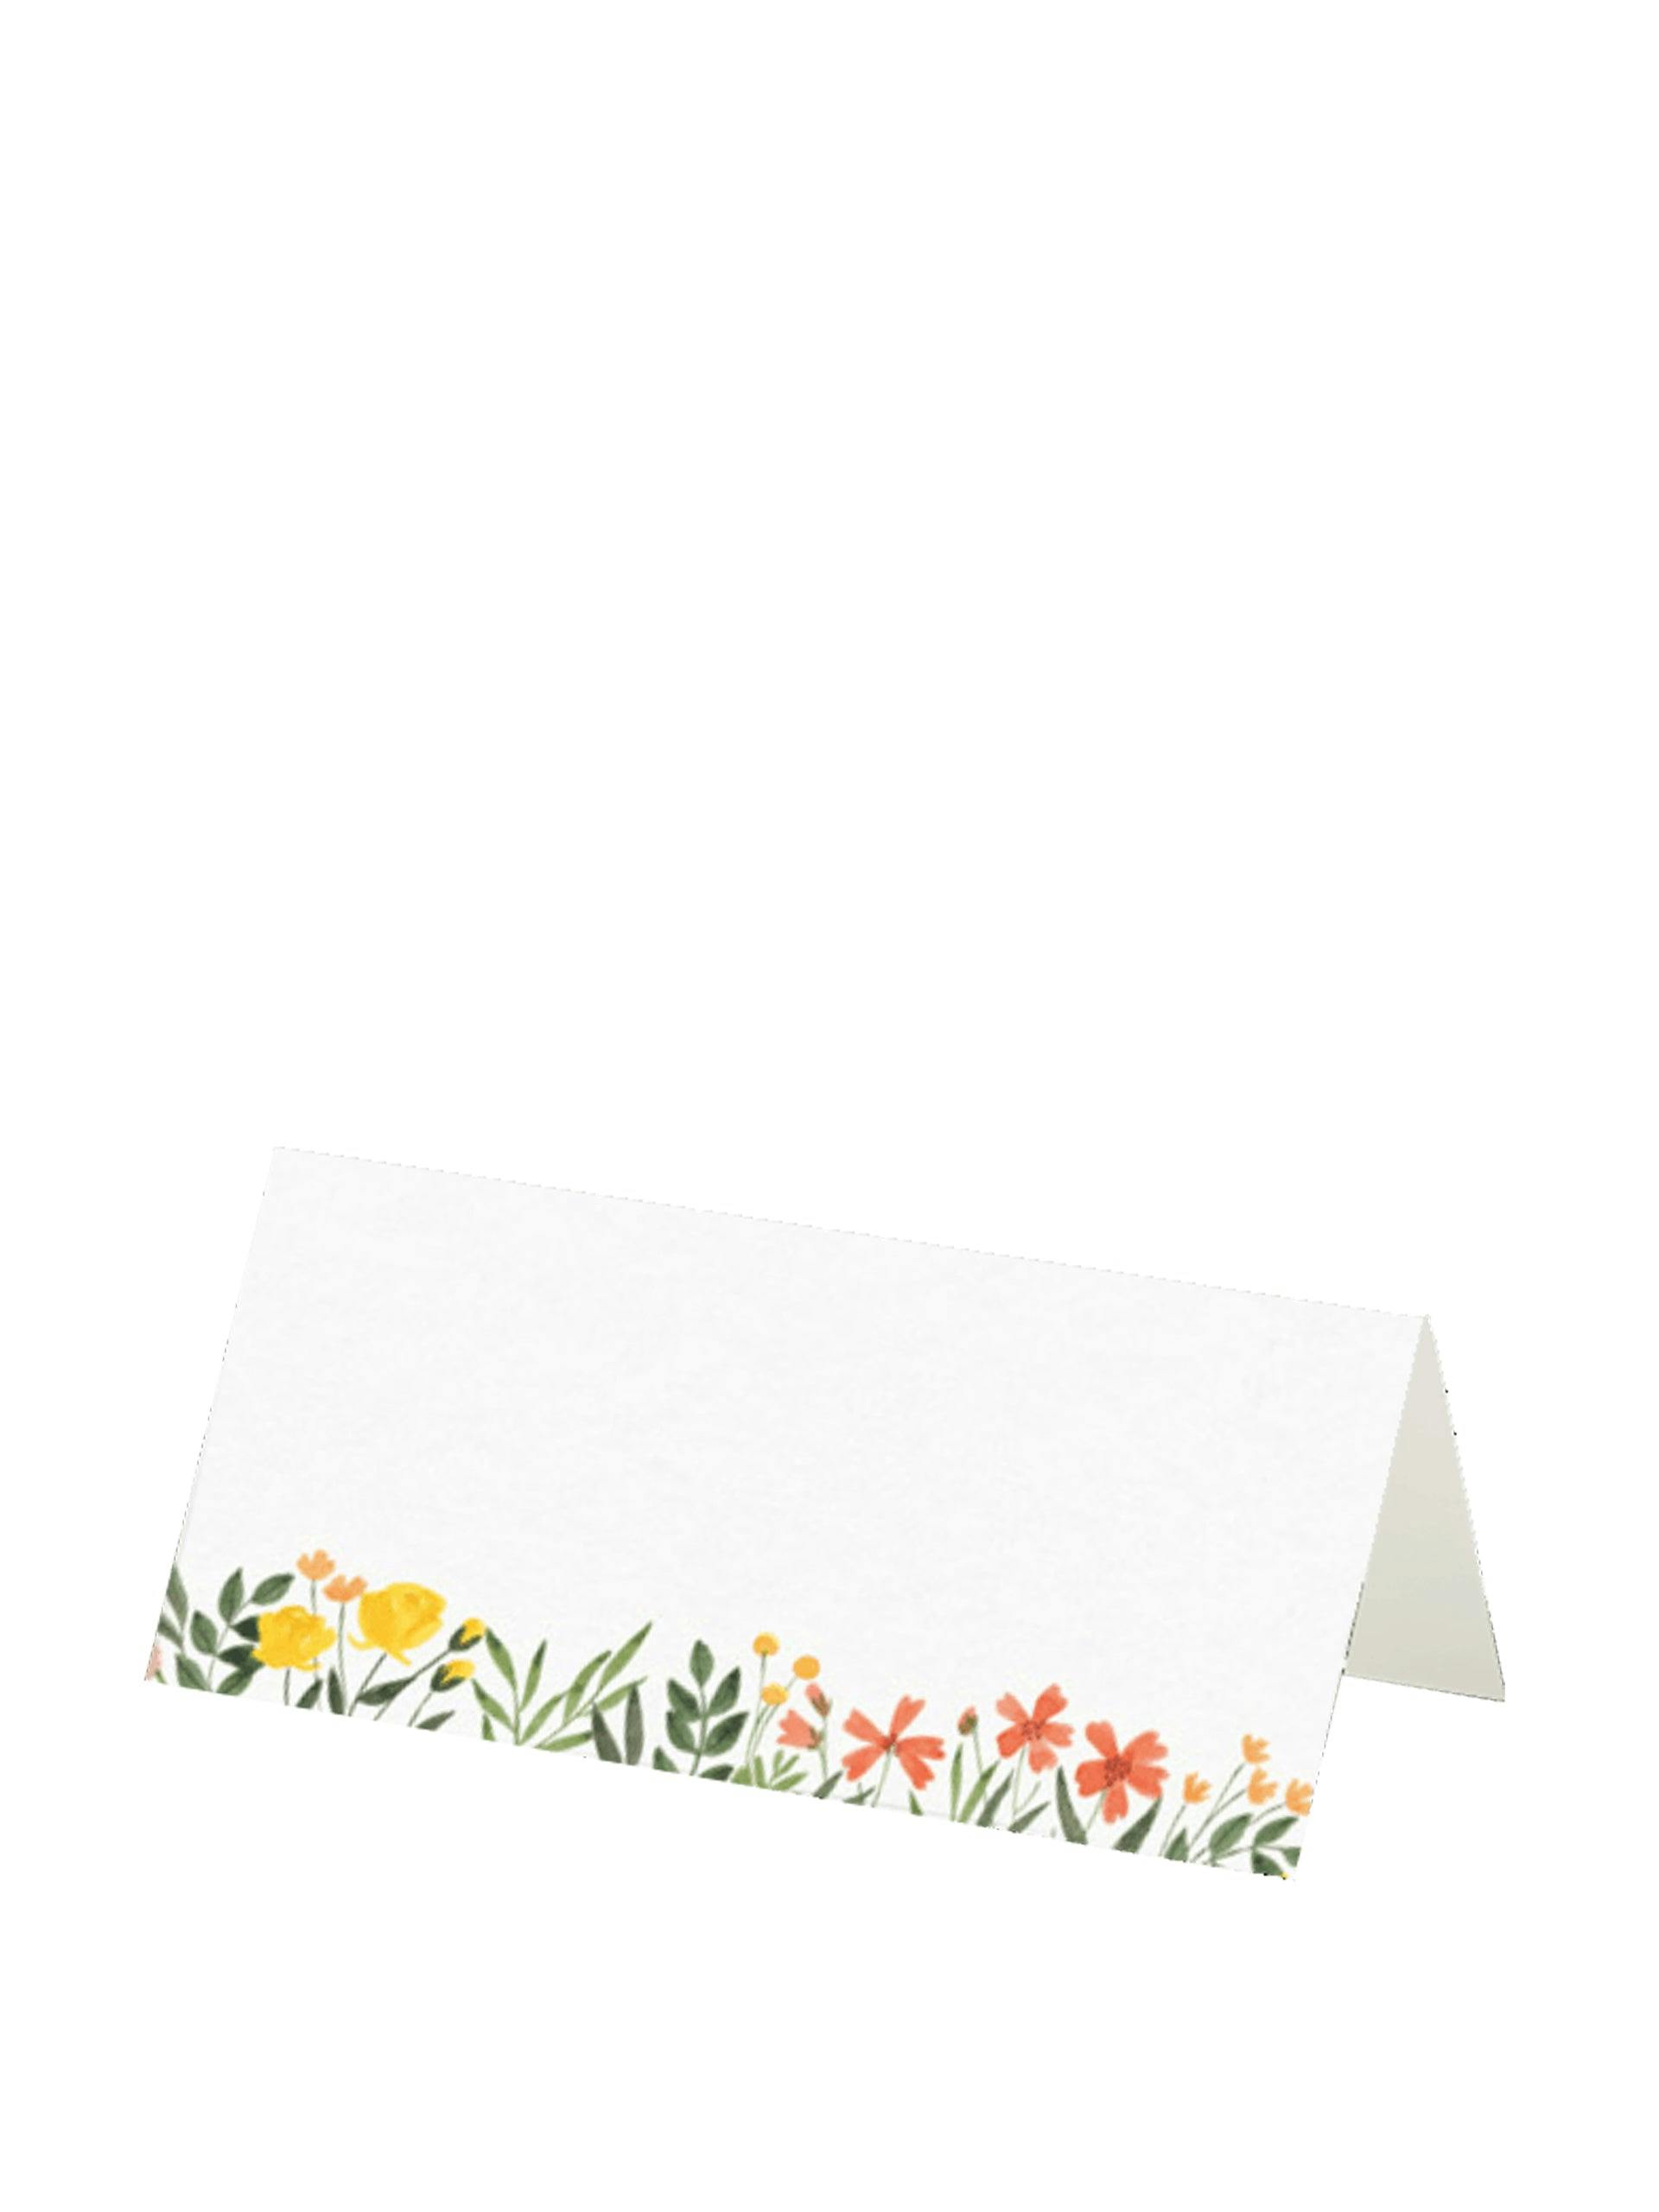 English Meadow place cards (set of 15)